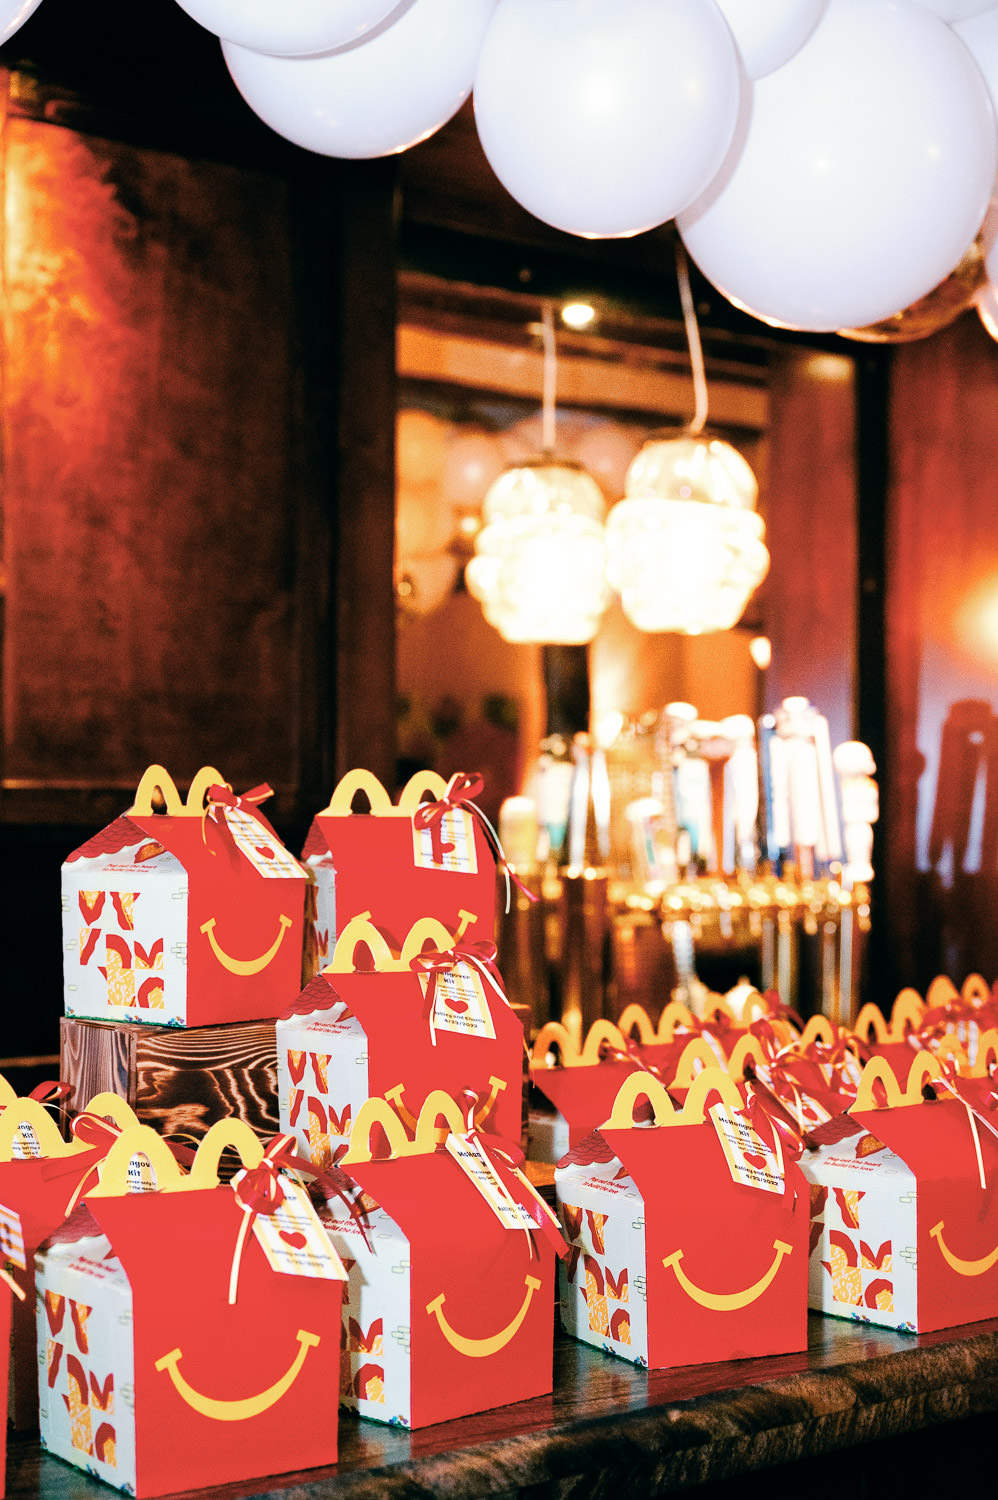 McDonalds happy meals are stacked at an wedding afterparty